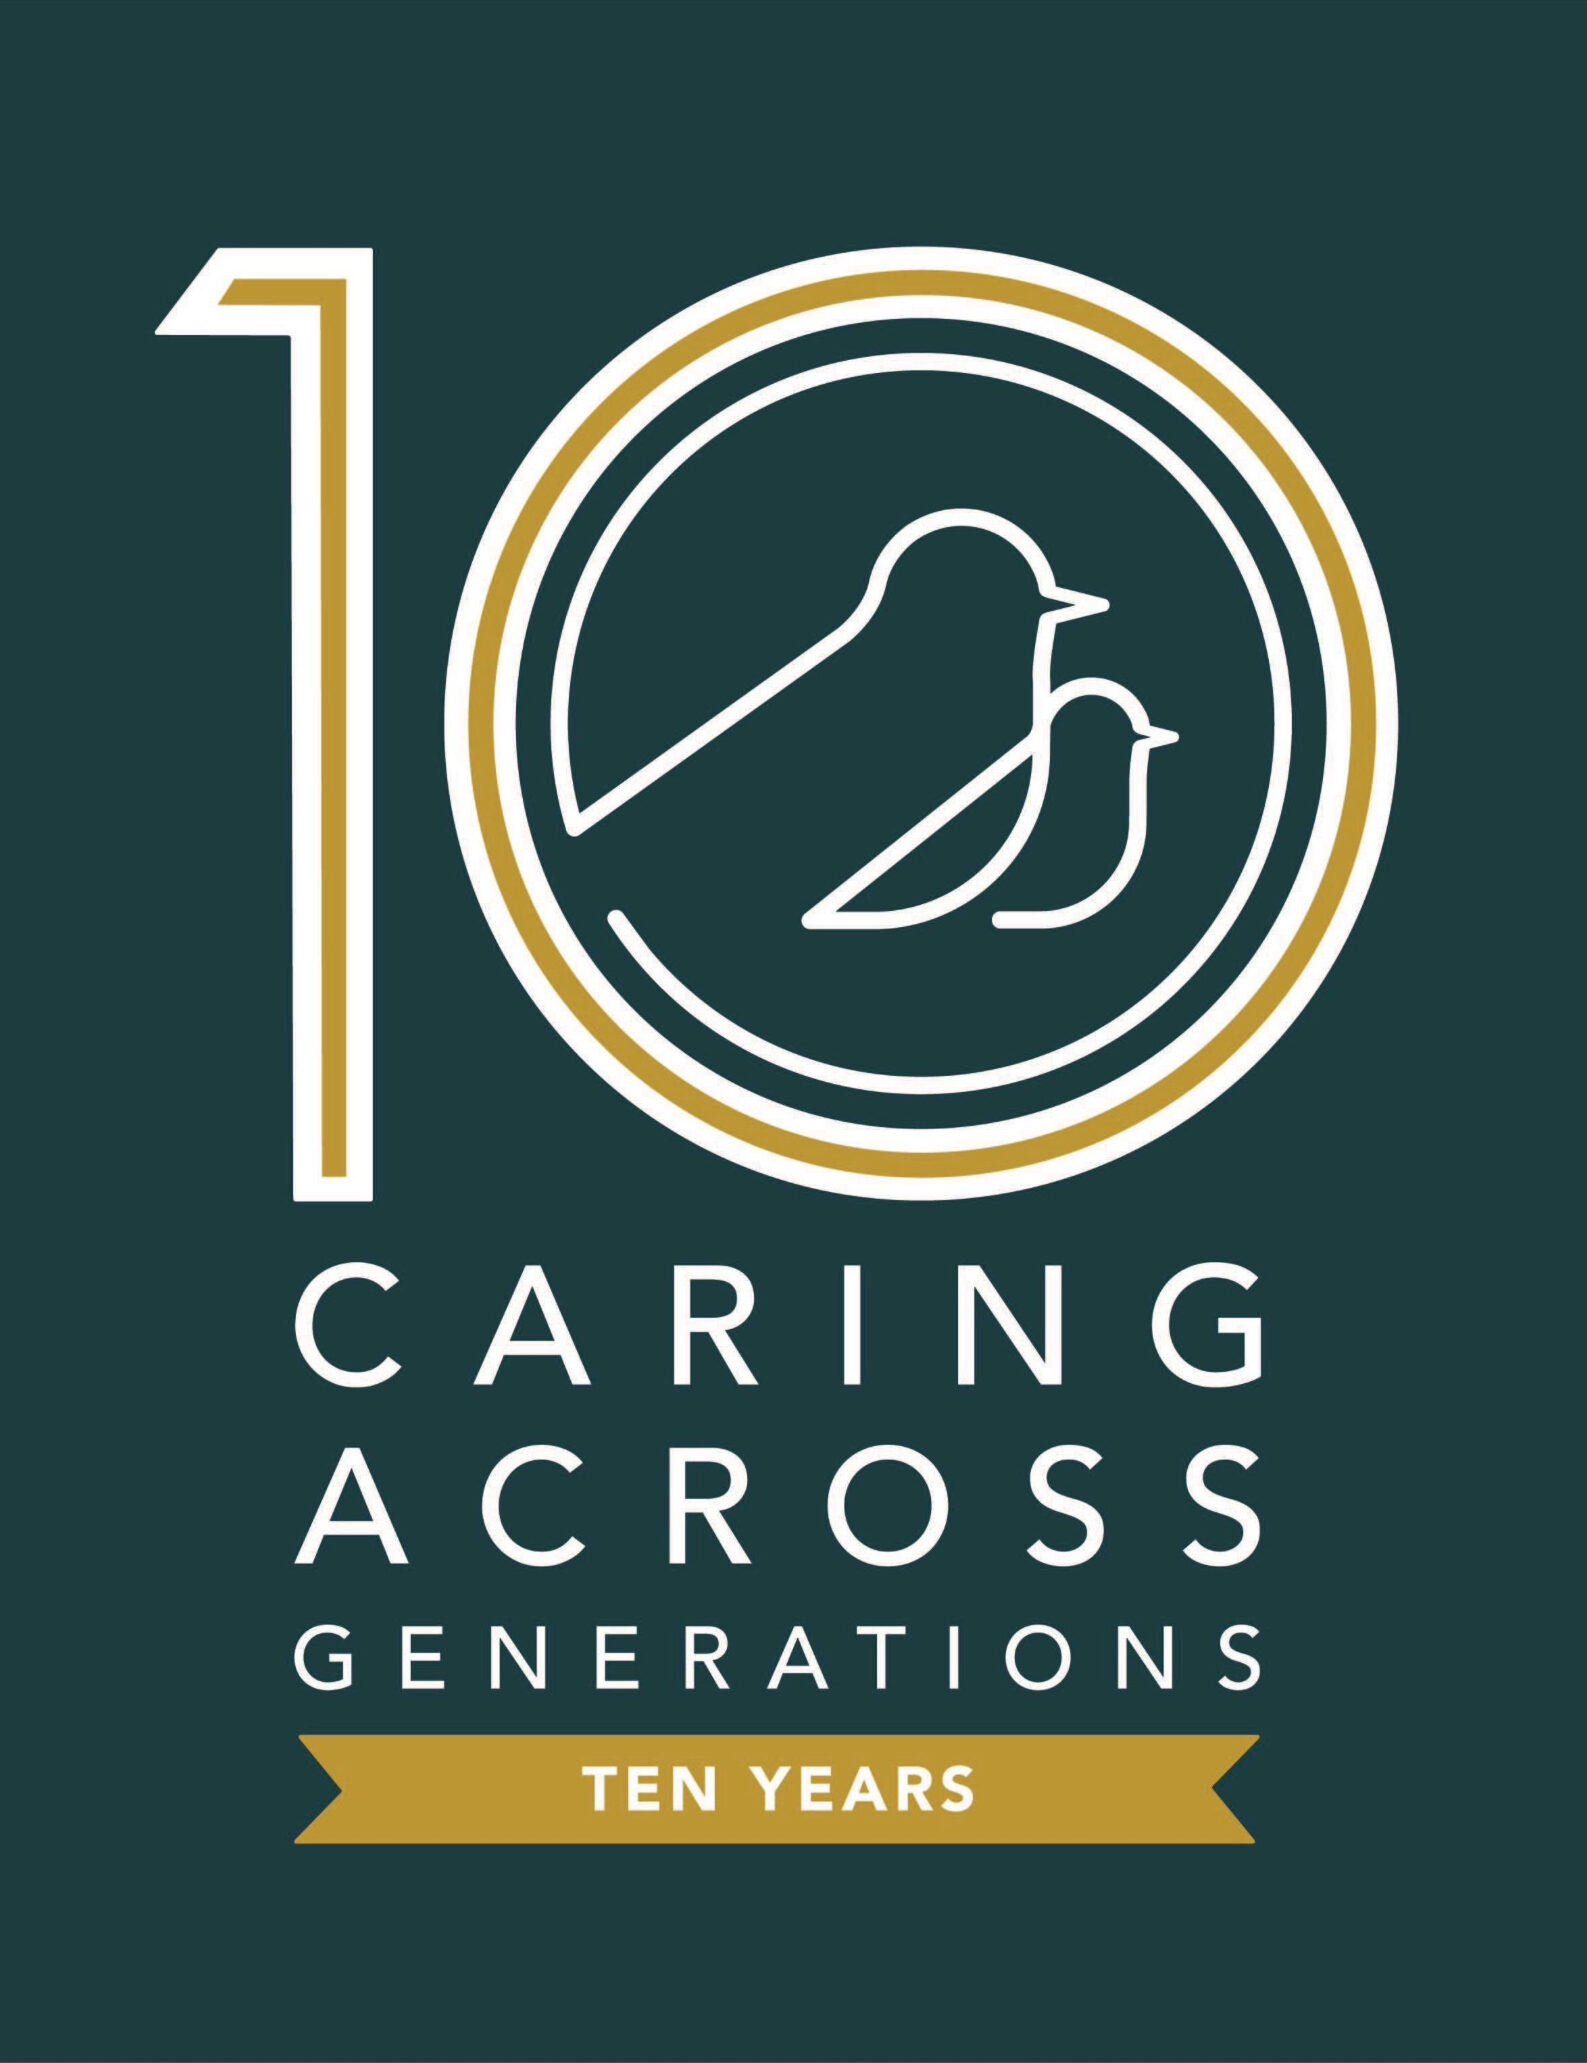 2021: 10 Years as Caring Across Generations